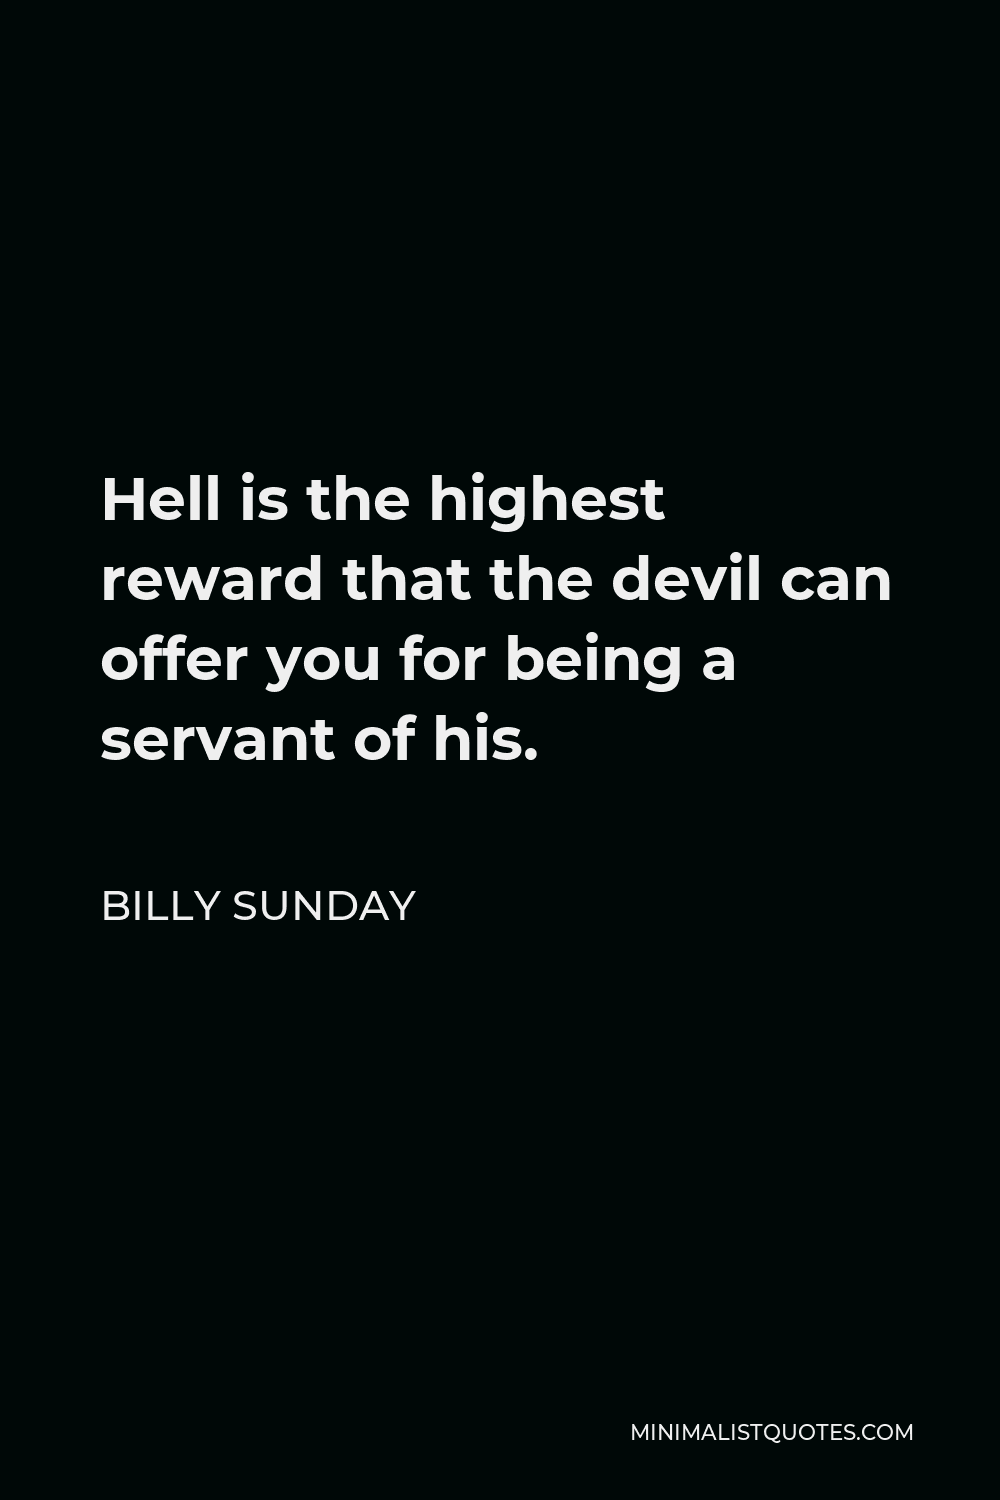 Billy Sunday Quote - Hell is the highest reward that the devil can offer you for being a servant of his.